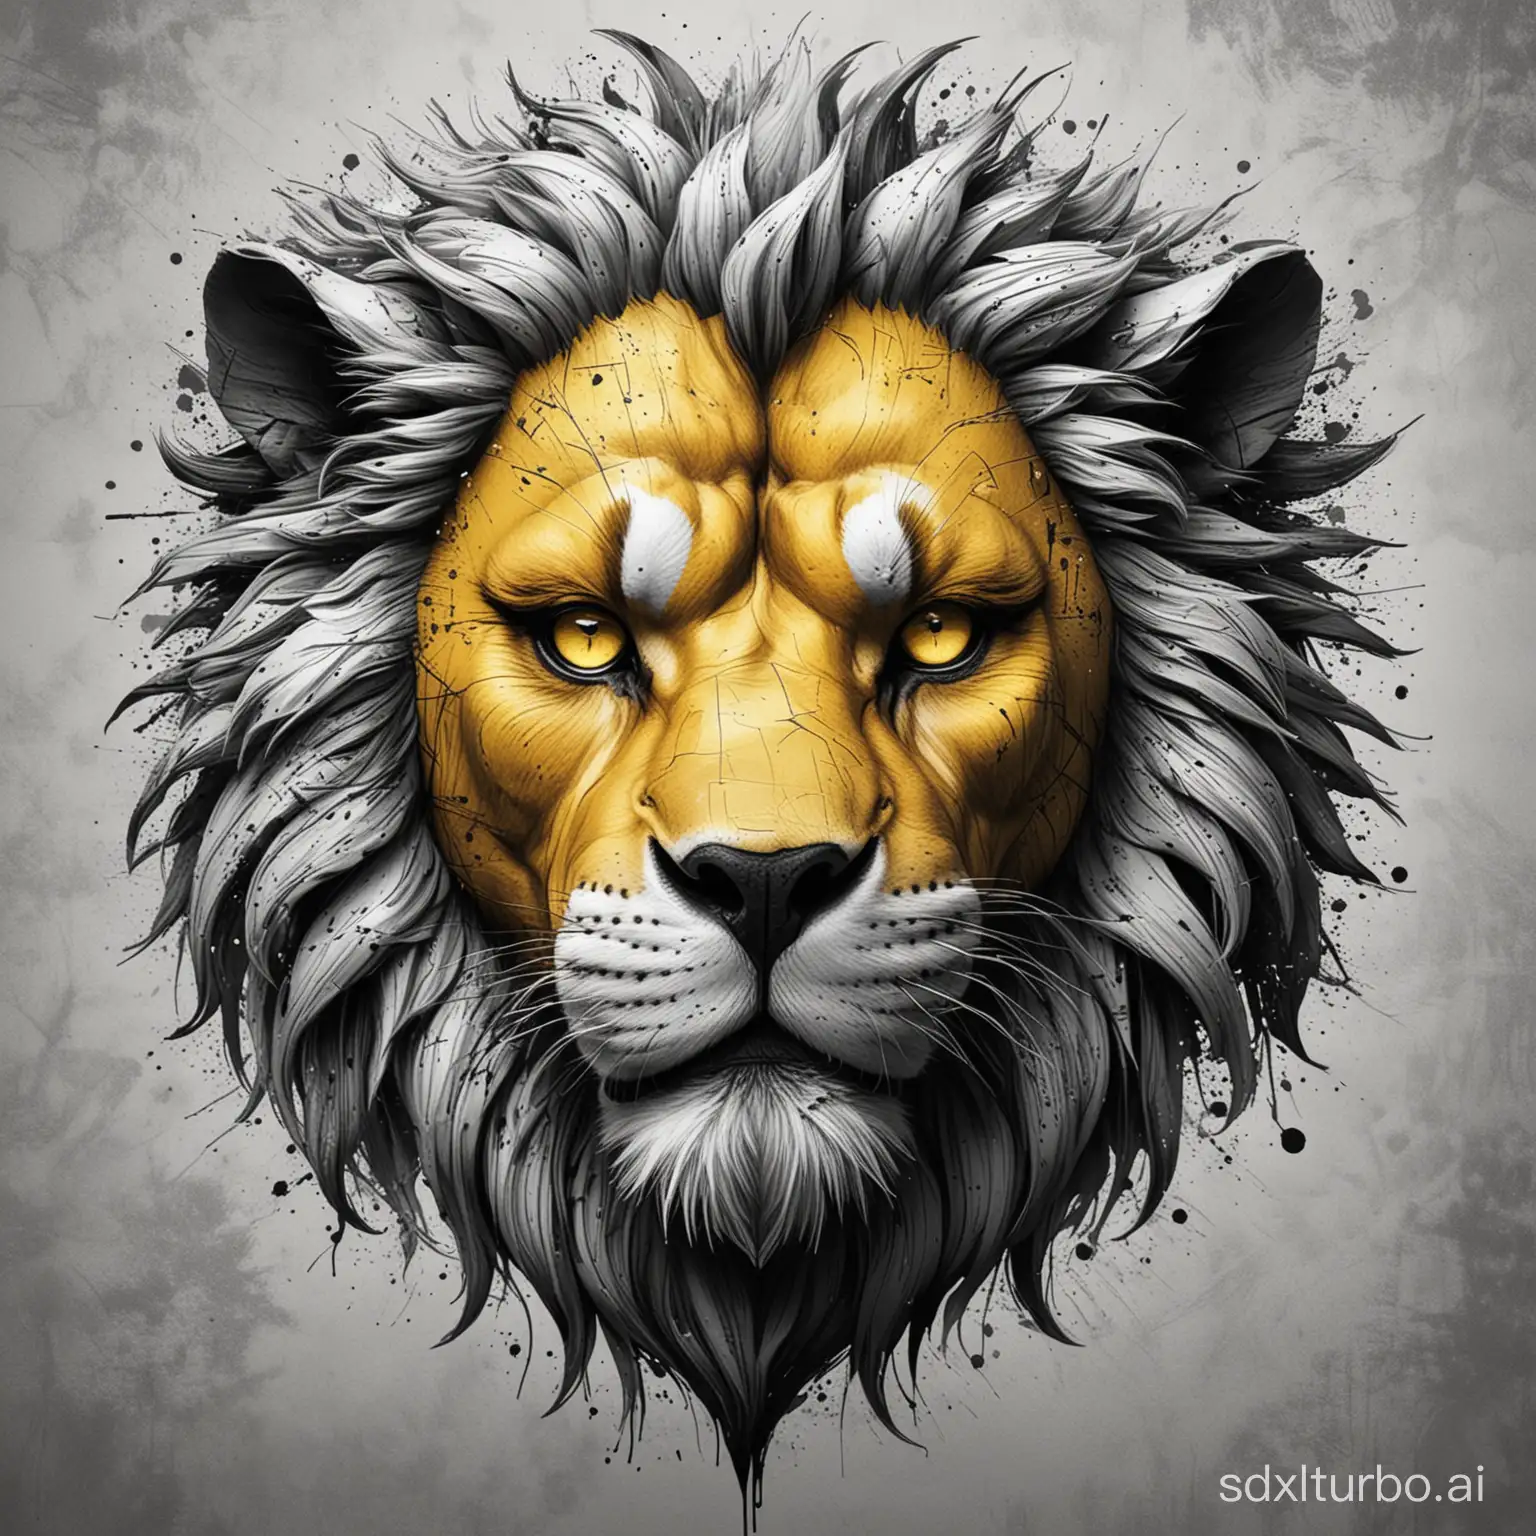 Comic-Style-Lions-Head-with-Intense-Gaze-in-Black-and-White-with-Striking-Yellow-Eye